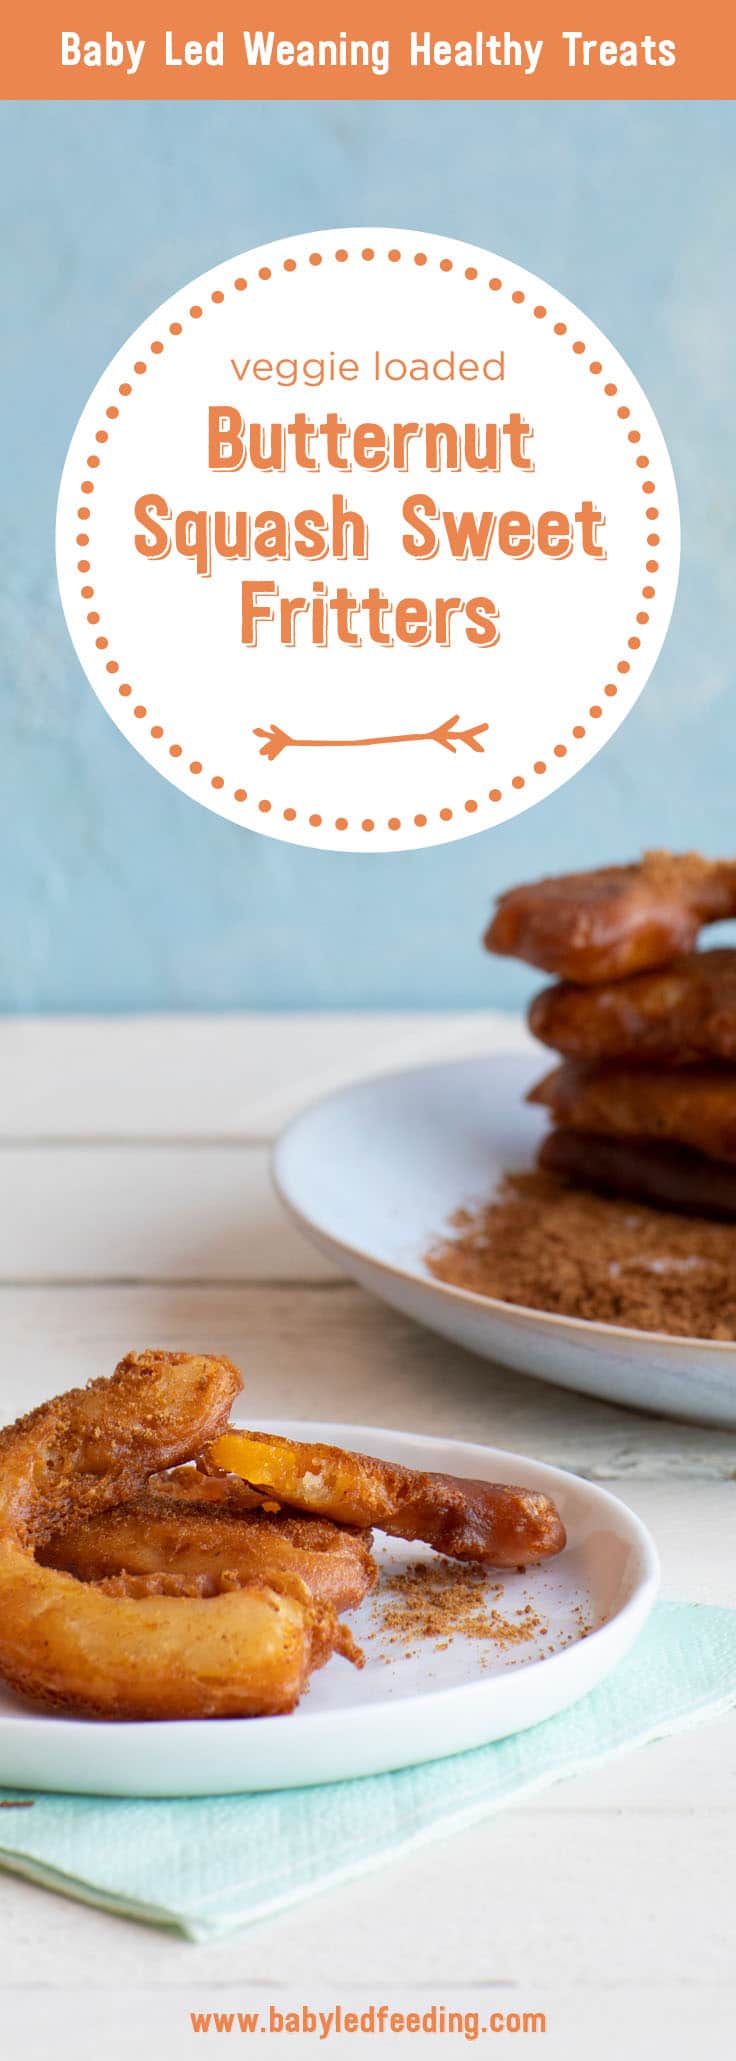 Low fat, high fiber, and refined sugar free. Sweet Butternut Squash Fritters are loaded with flavour from healthy butternut squash, cinnamon, nutmeg, and coconut sugar. This is an easy healthy finger food with a Fall flavour flair for baby led weaning and healthy toddler snacks. #babyledweaning #babyledfeeding #butternutsquash #fingerfood #toddlerfood #vegetarian 